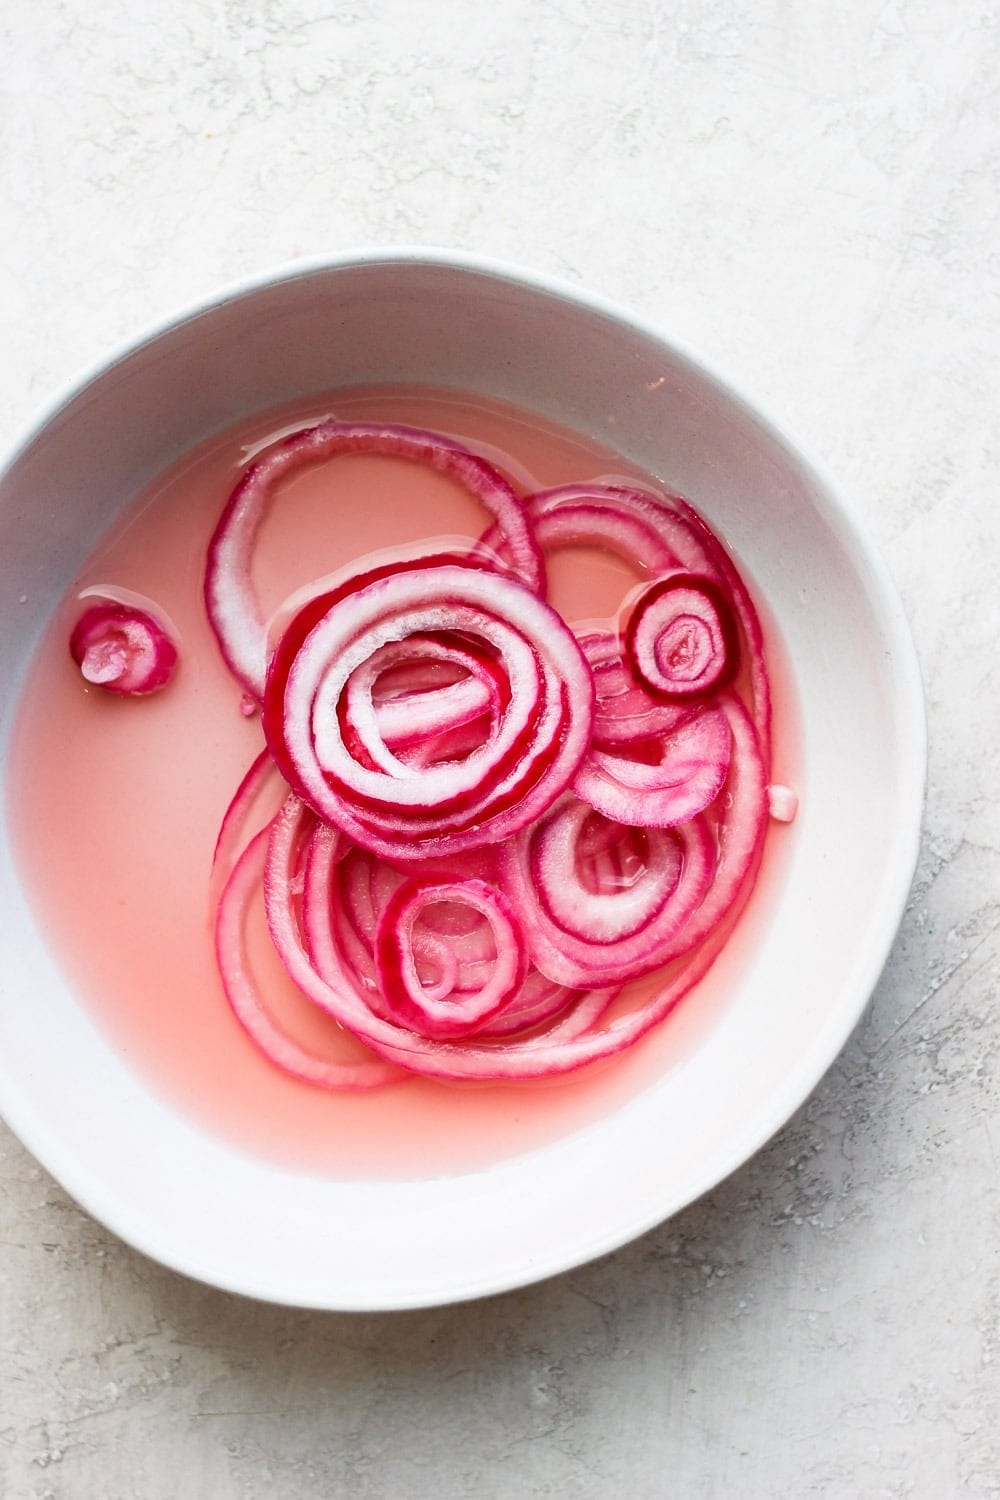 Pickled onions in a bowl.